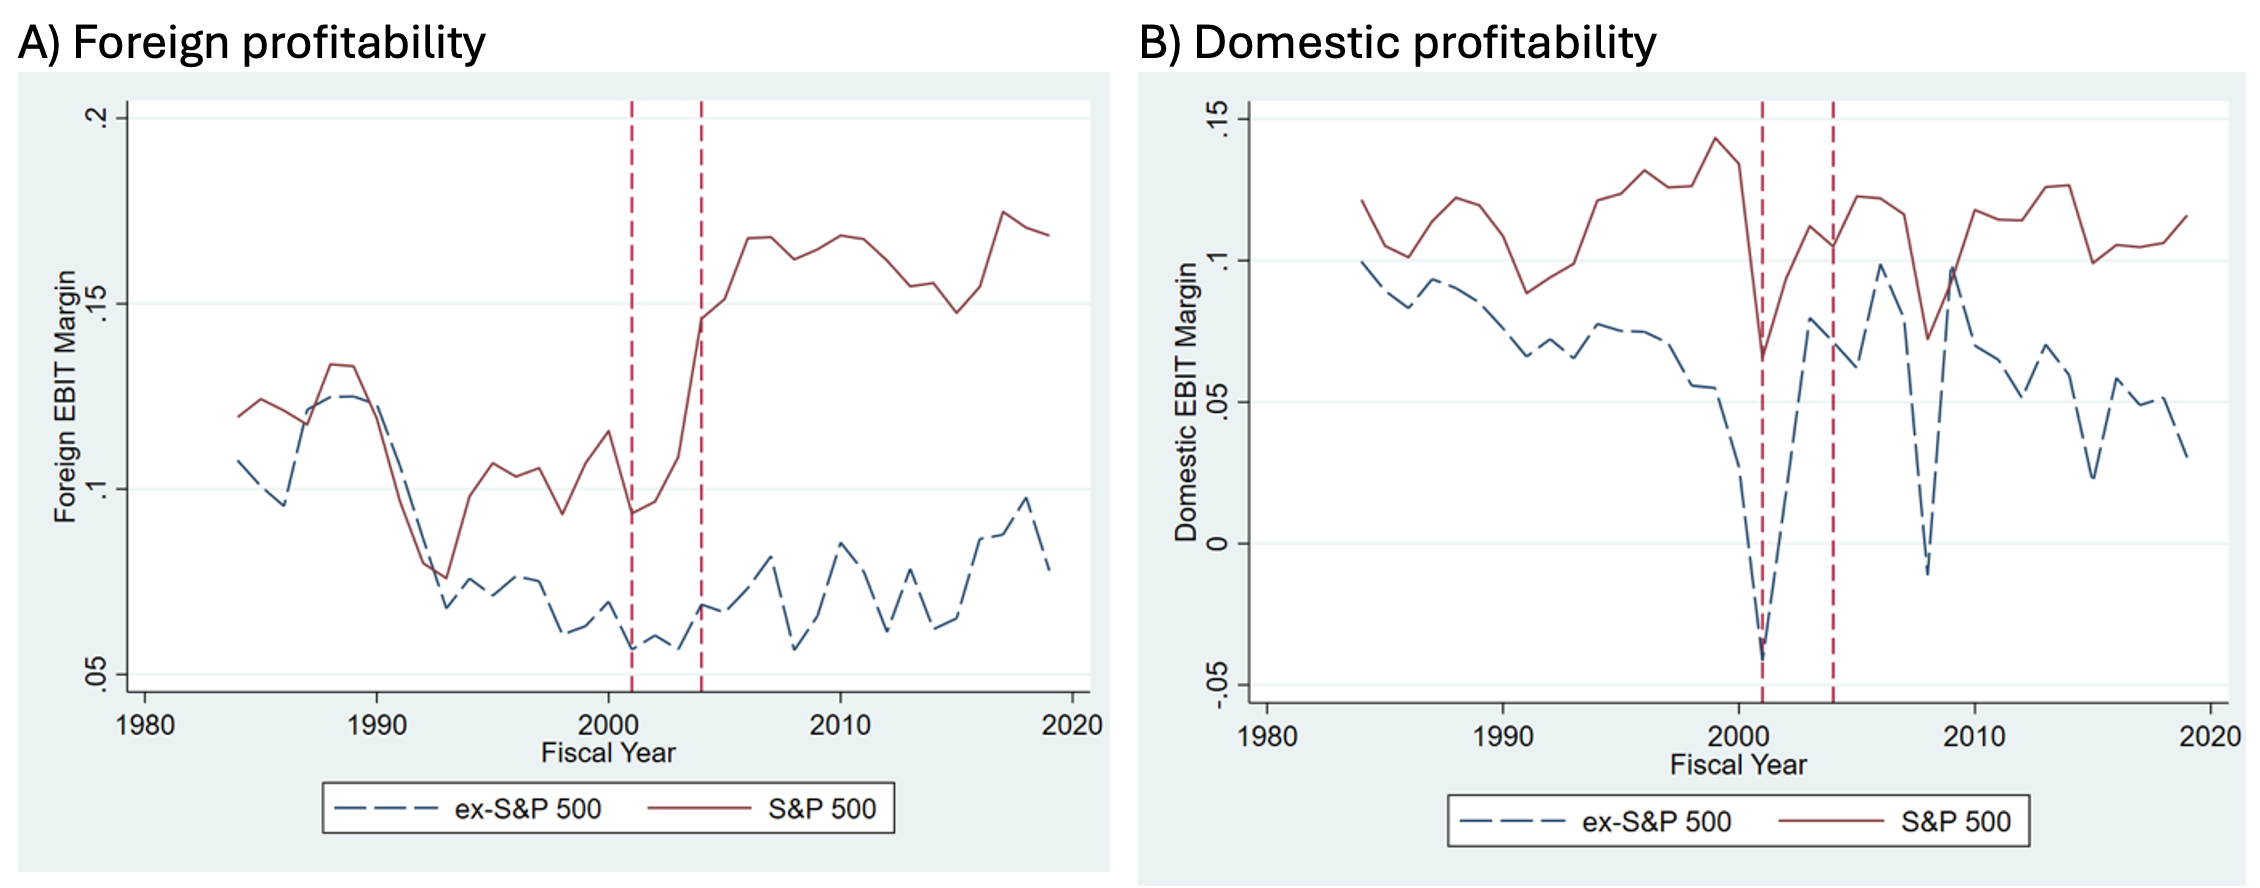 Figure 2 Trends in domestic and foreign profitability by S&P 500 status